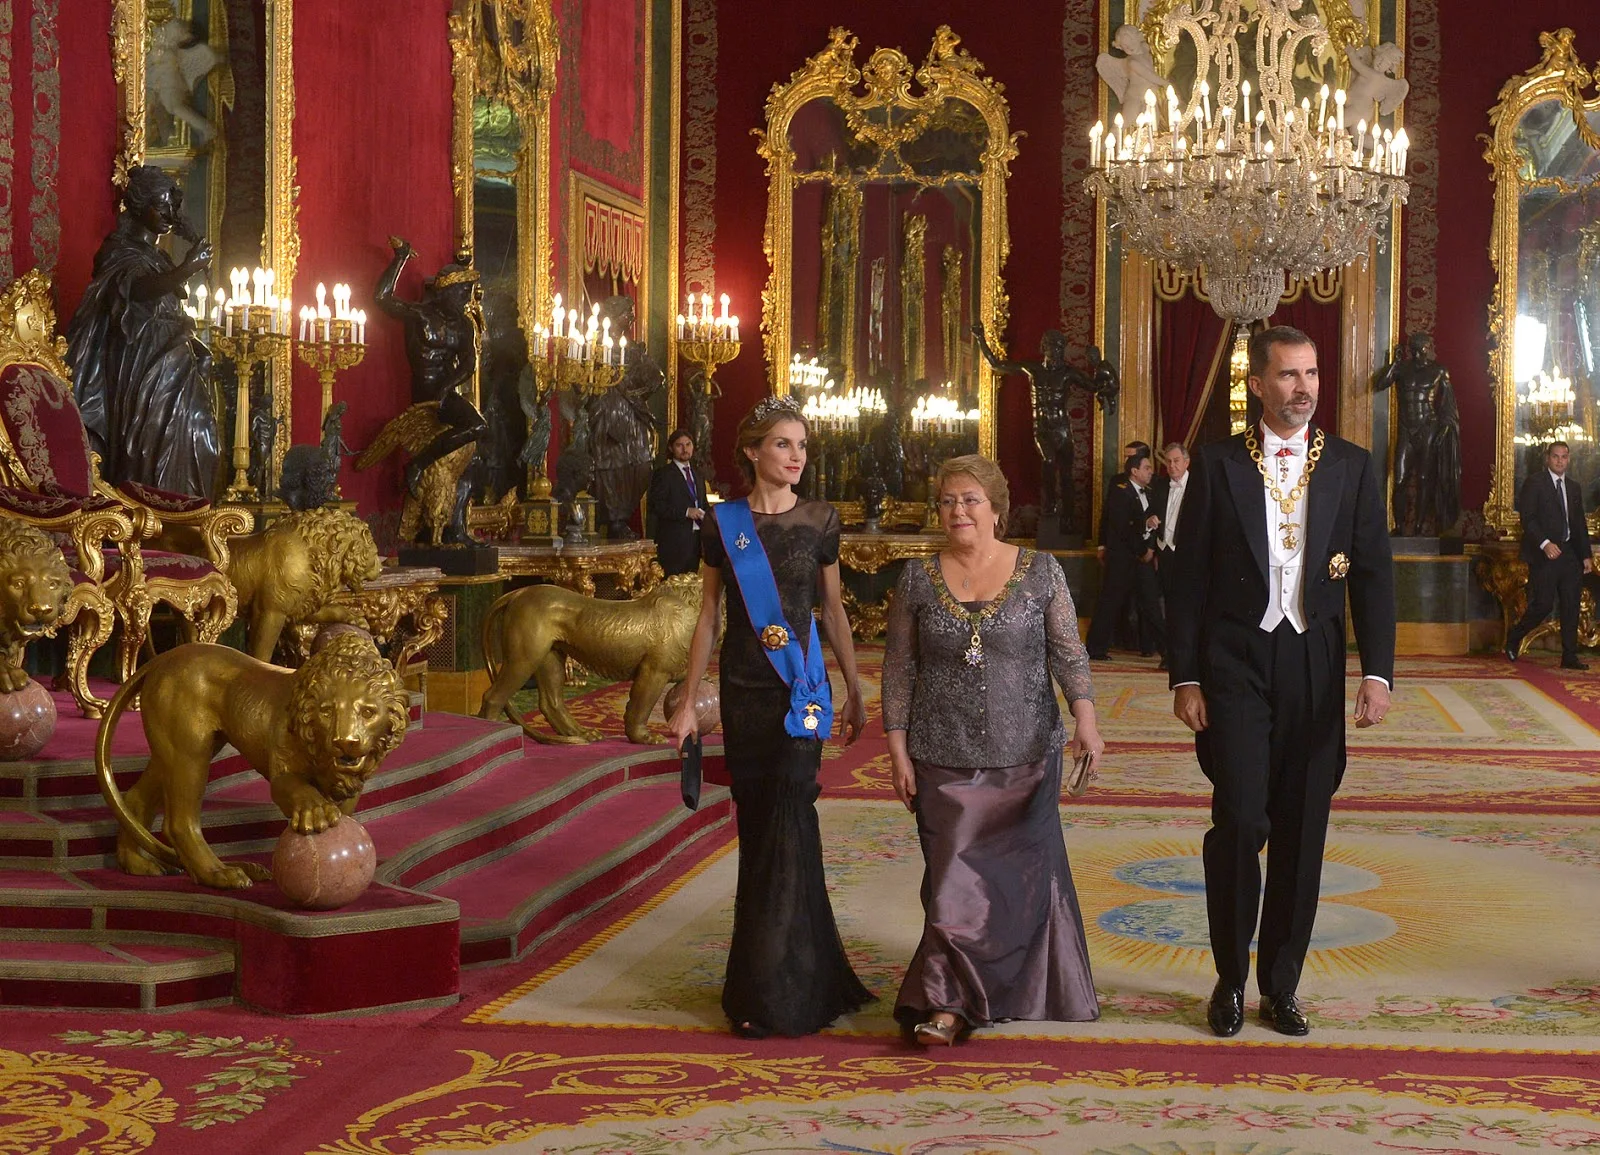 Gala Dinner at the Royal Palace in Madrid